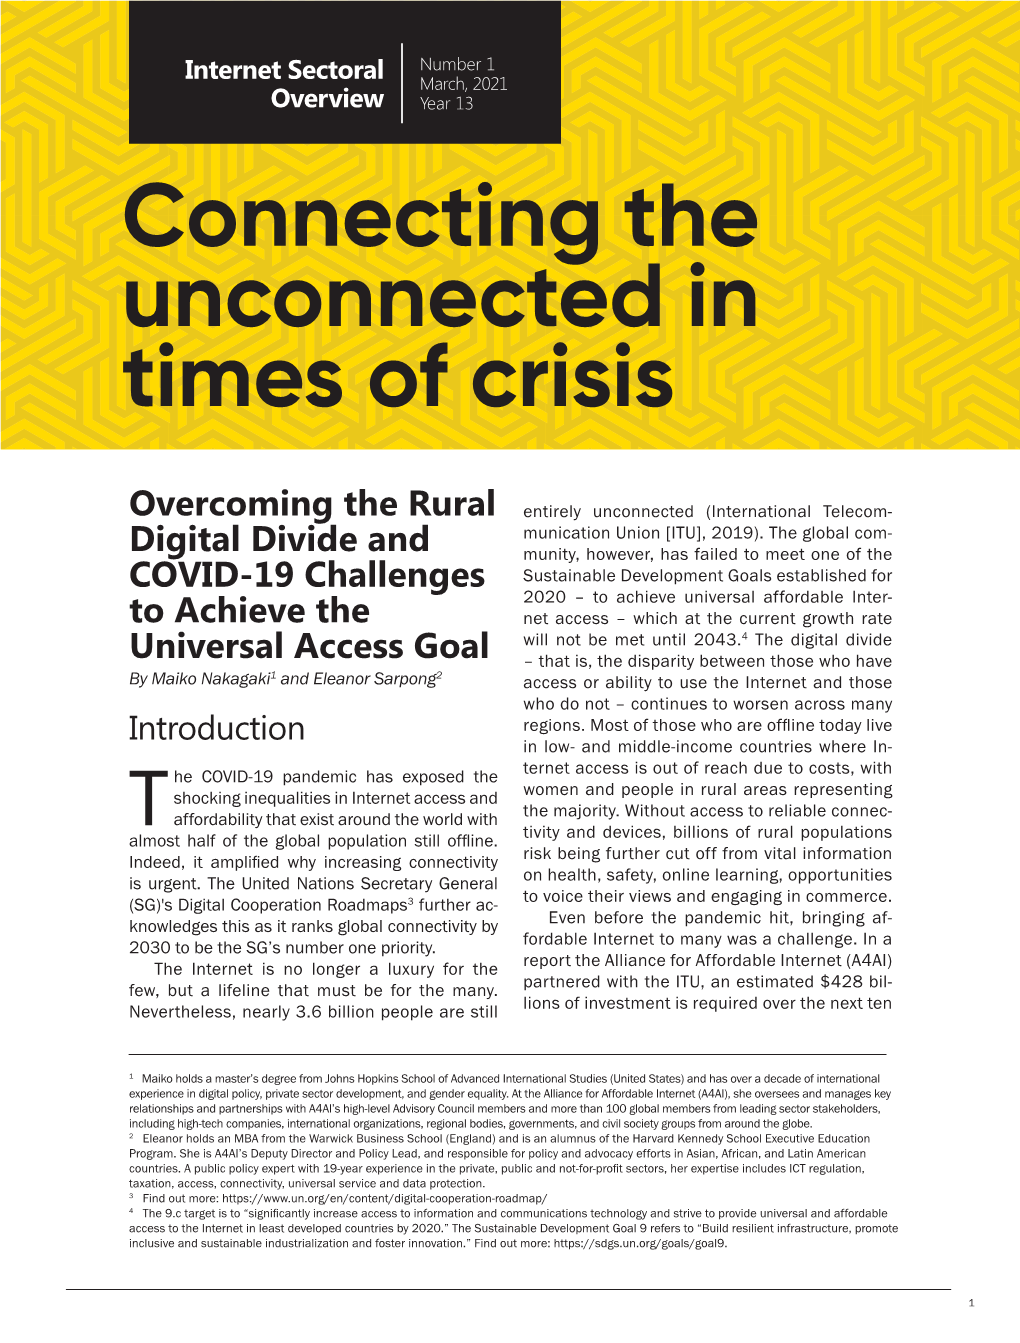 Connecting the Unconnected in Times of Crisis